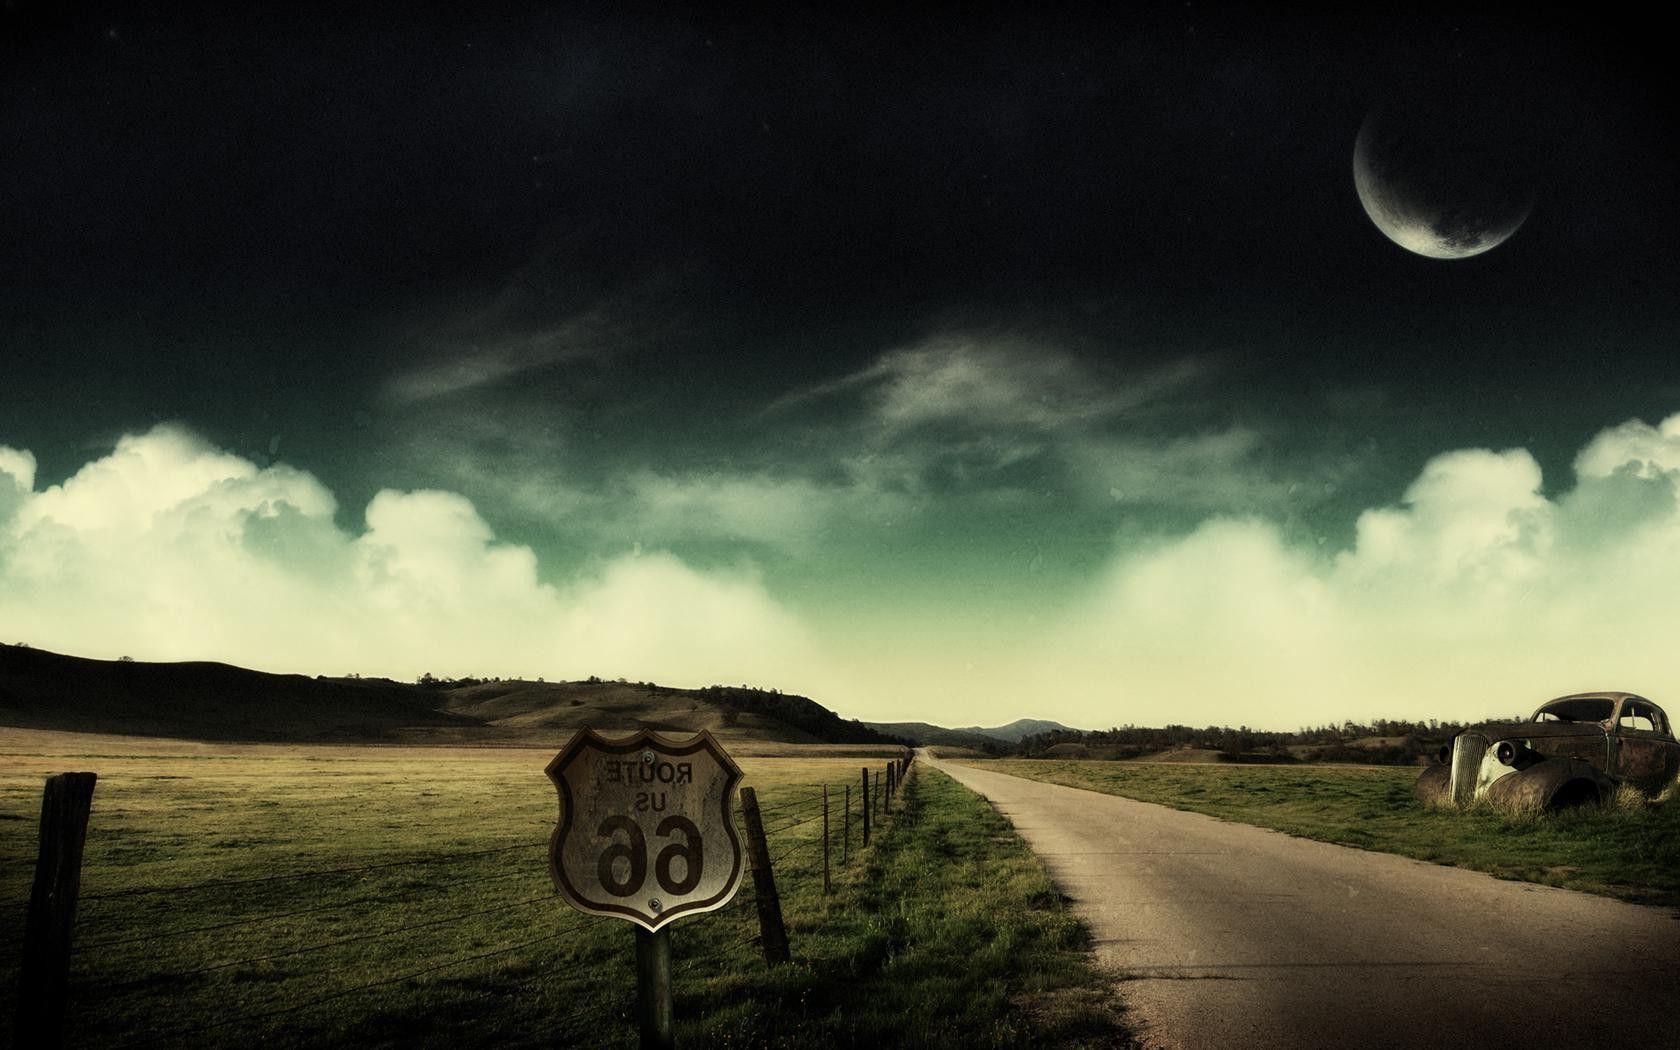 Route 66 Wallpapers - Wallpaper Cave